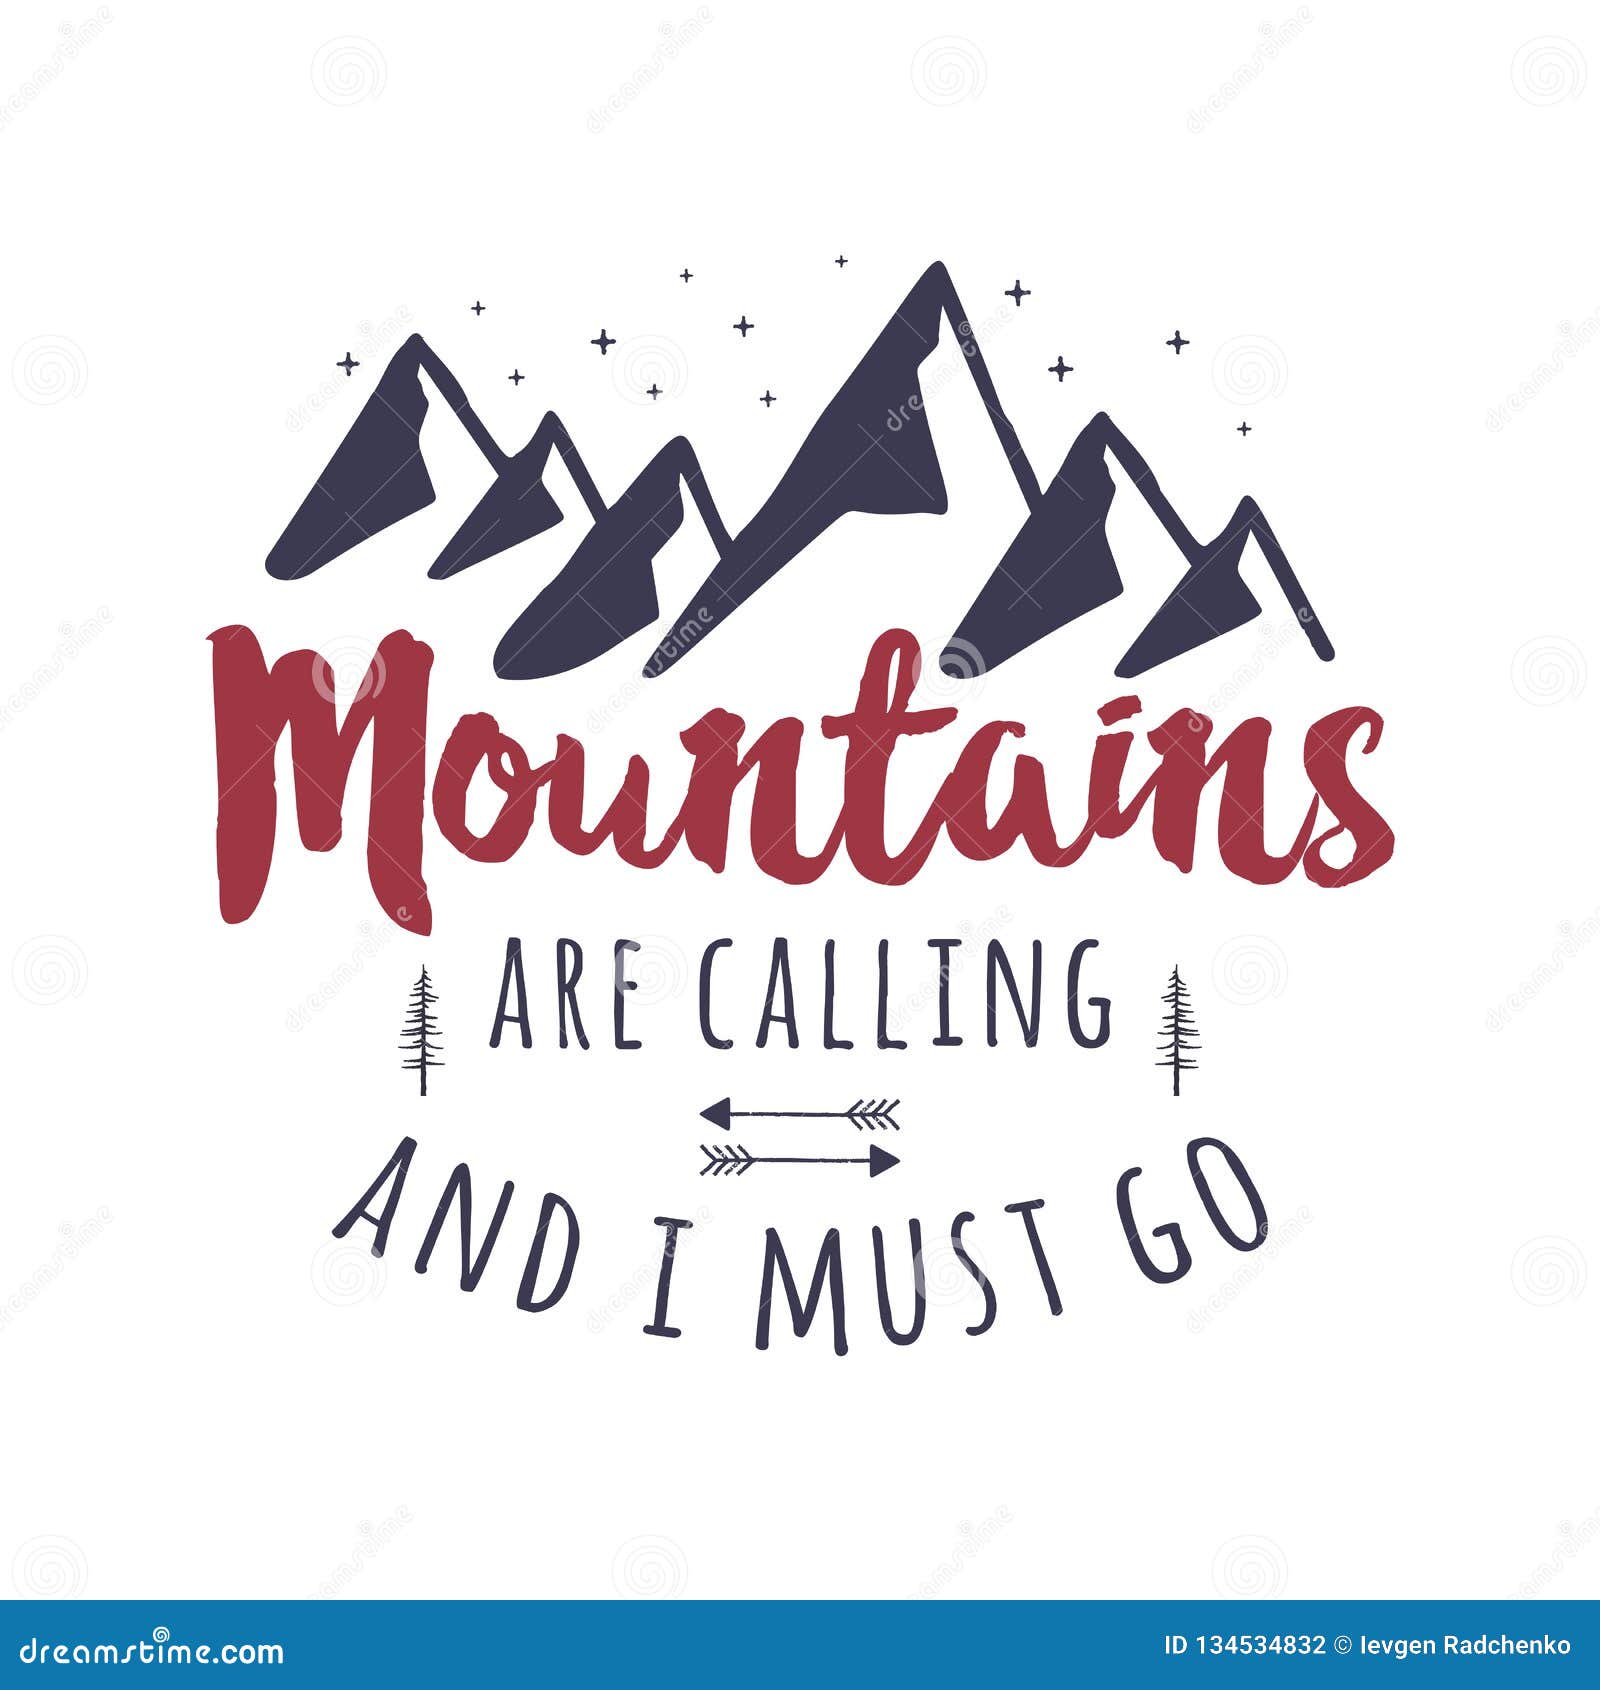 Mountains Are Calling And I Must Go Tee Graphic Design Mountain Adventure Typography Logo Vintage Hand Drawn Travel Stock Vector Illustration Of Must Journey 134534832